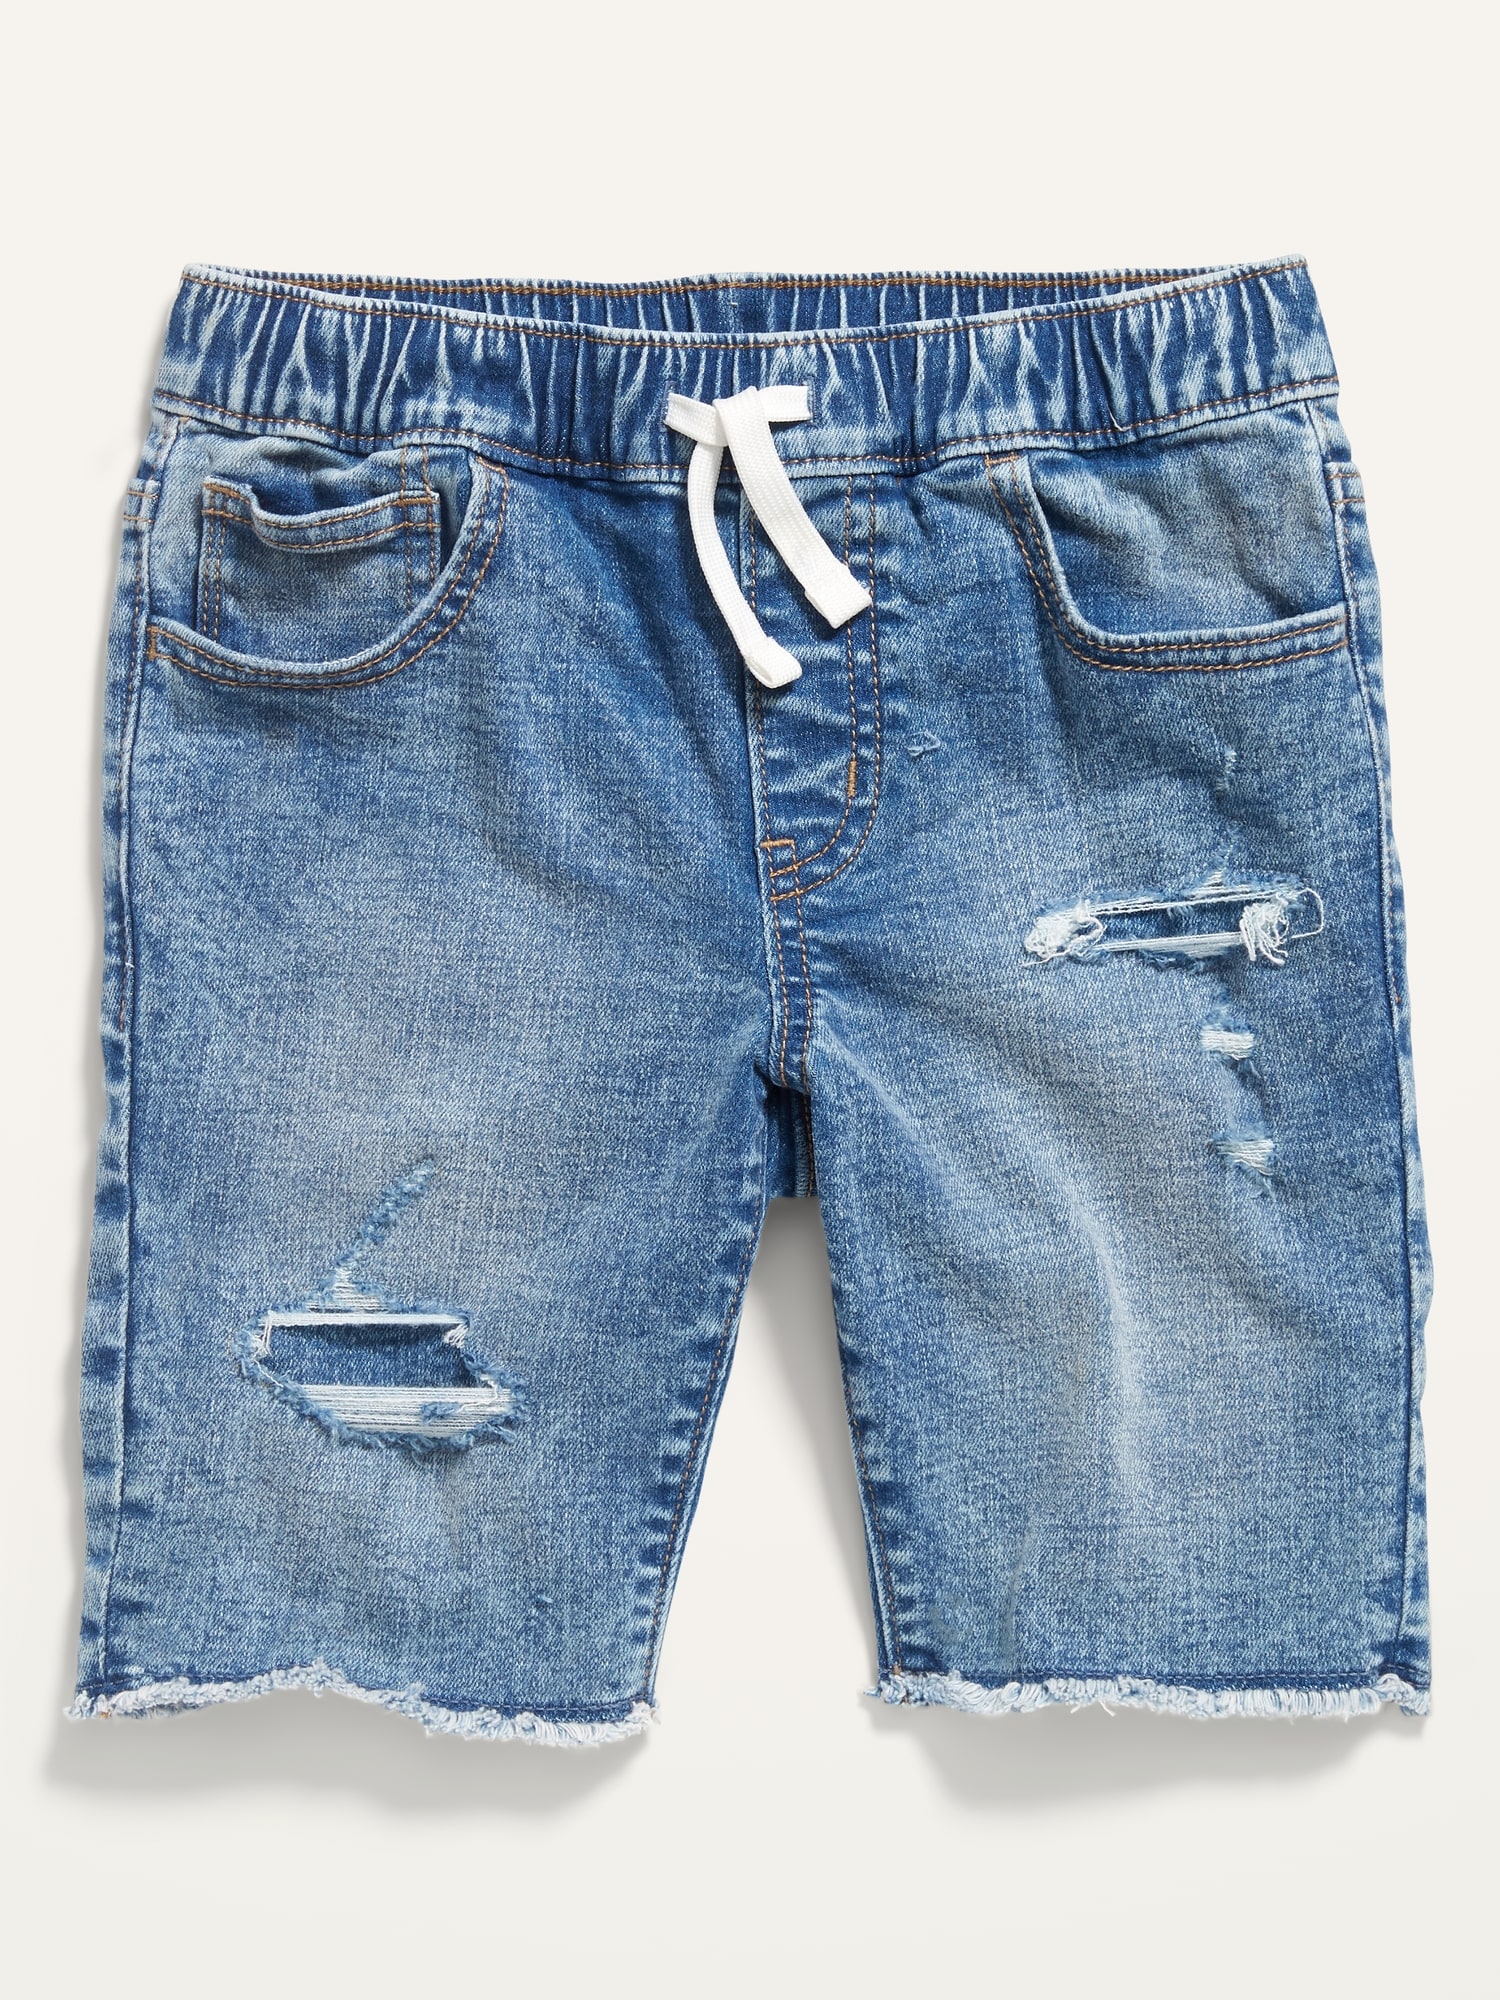 Karate Built-In Flex Max Ripped Jean Jogger Shorts for Boys